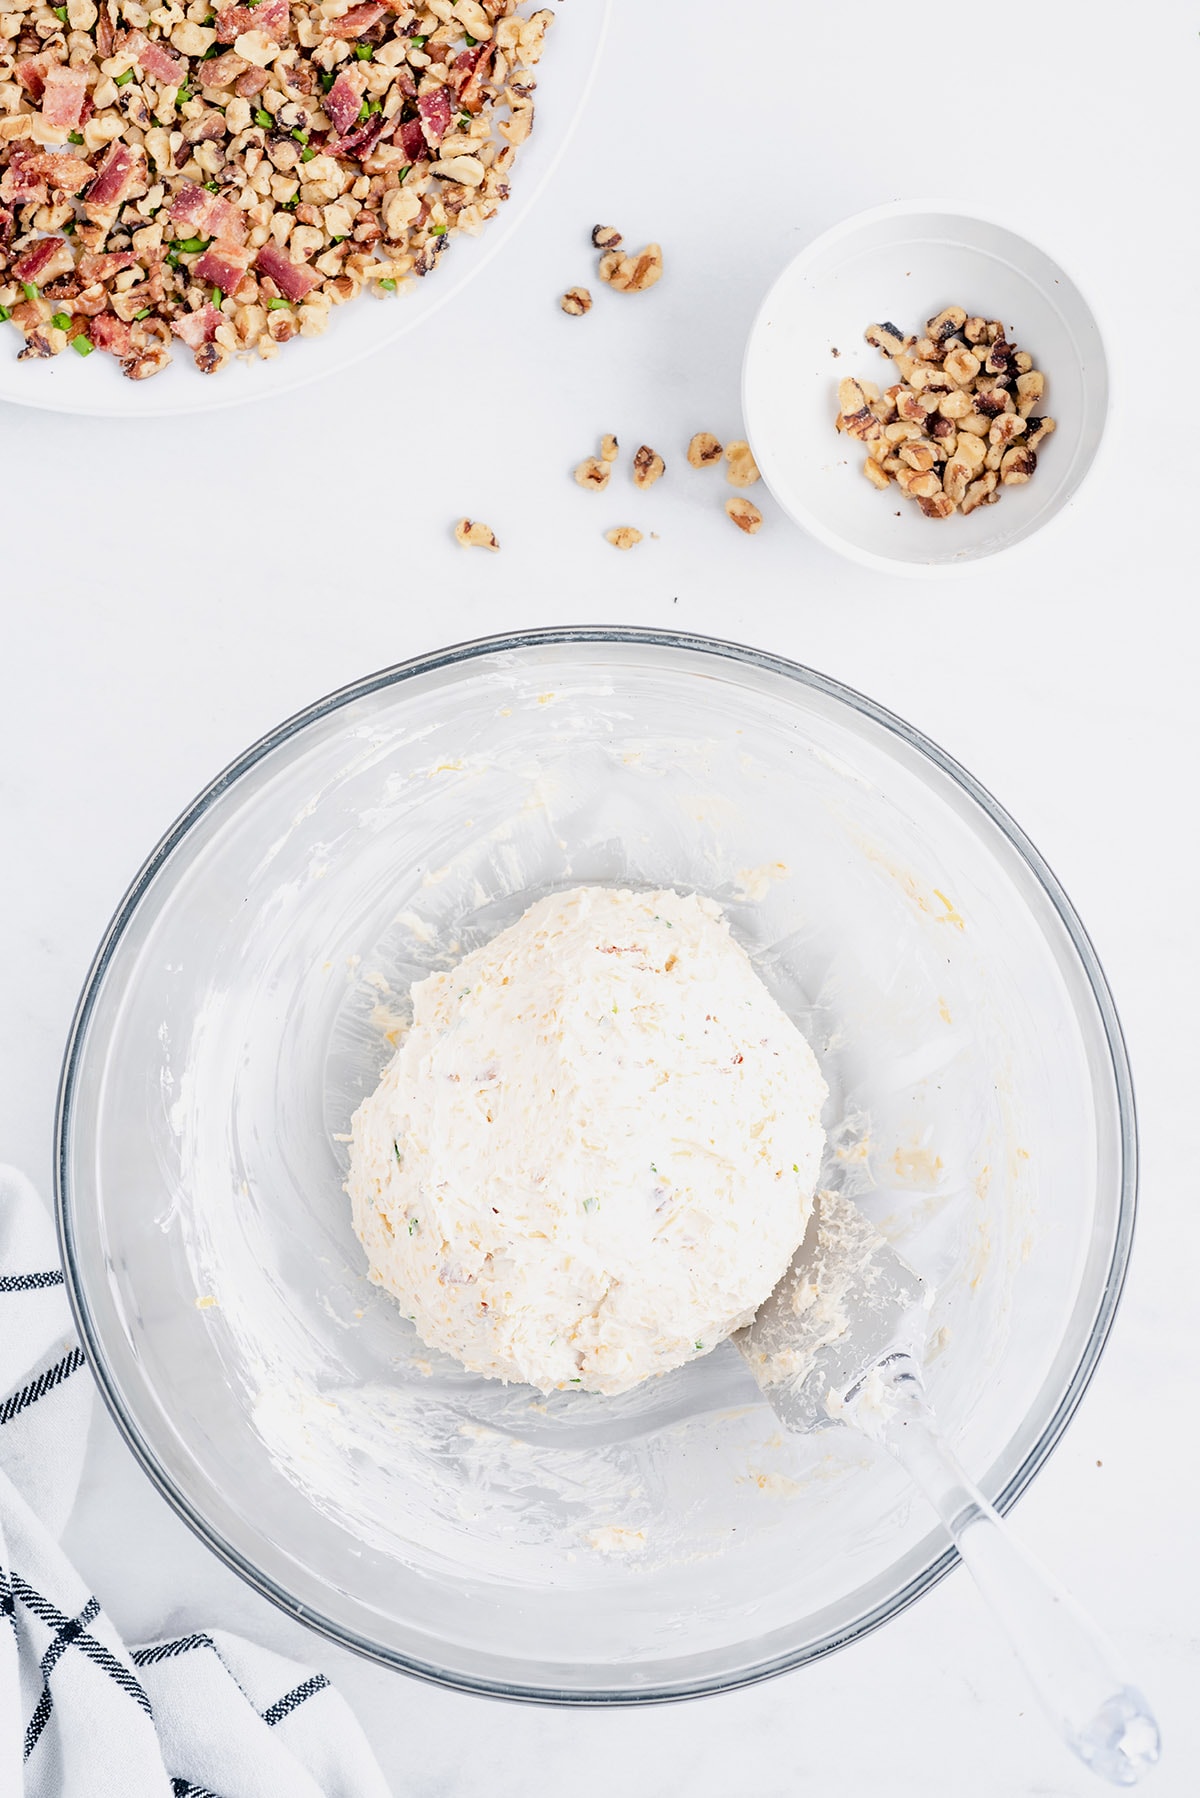 Form the cream cheese mixture into a large ball